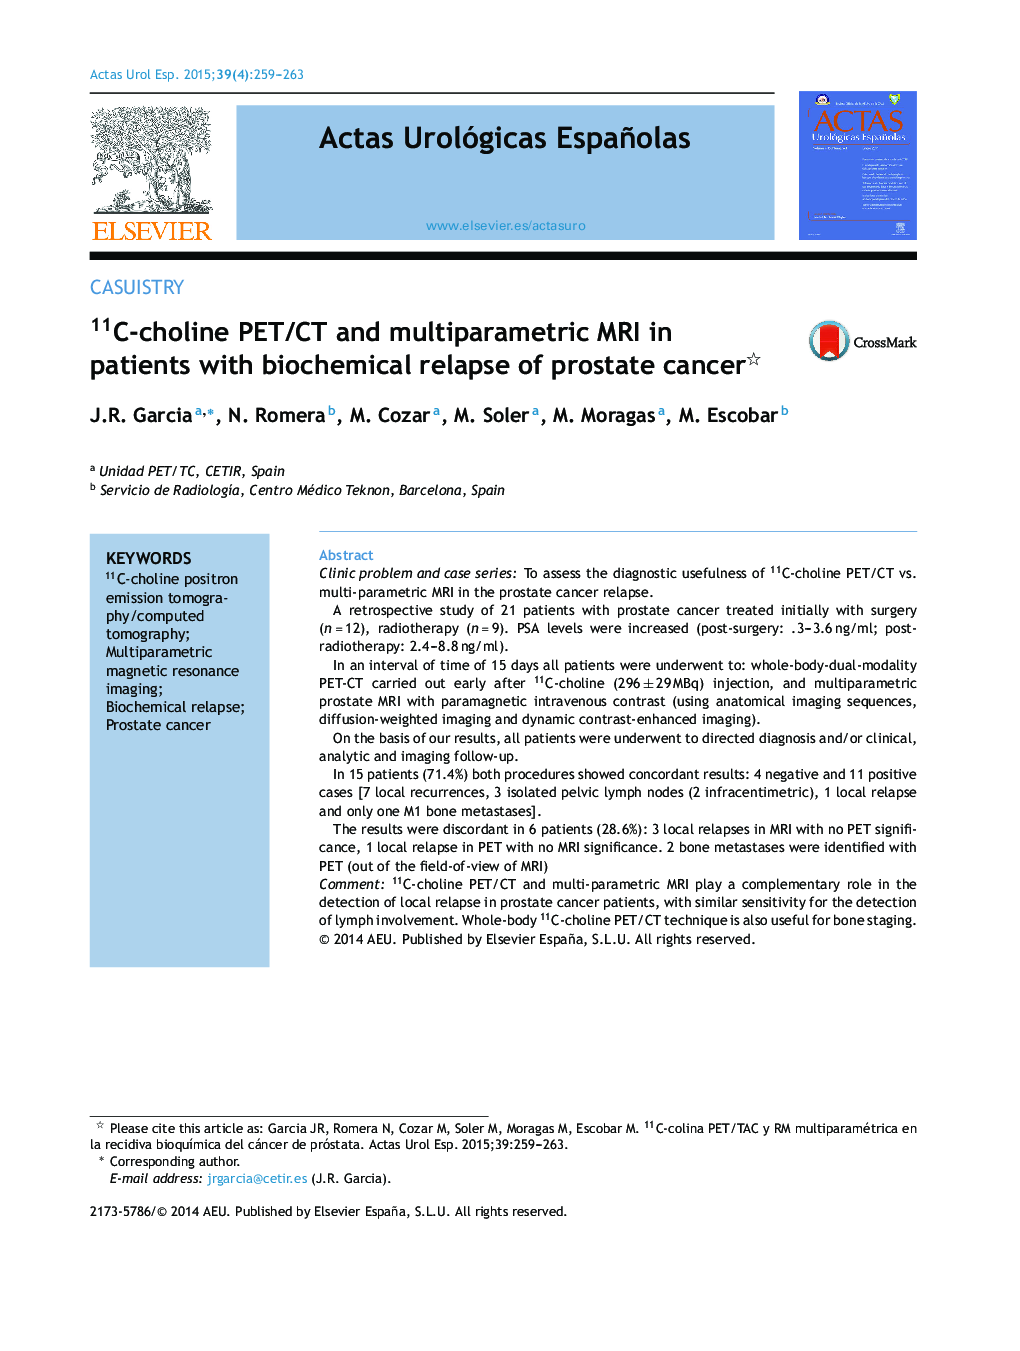 11C-choline PET/CT and multiparametric MRI in patients with biochemical relapse of prostate cancer